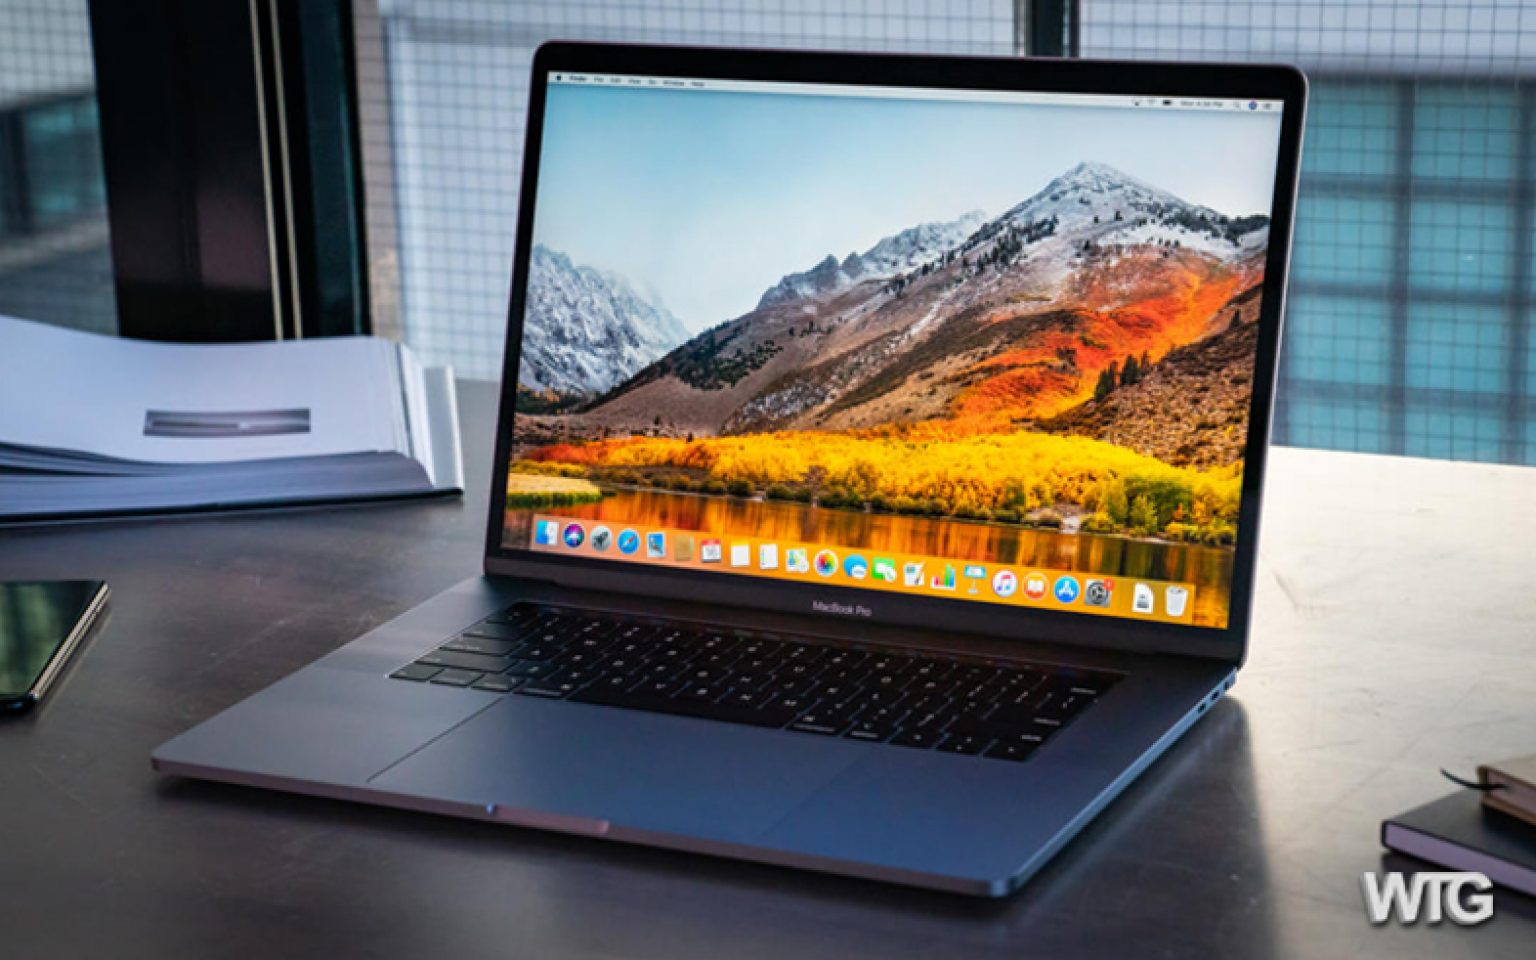 5 Best Laptops for Graphic Design > June 2022 > Buying Guide